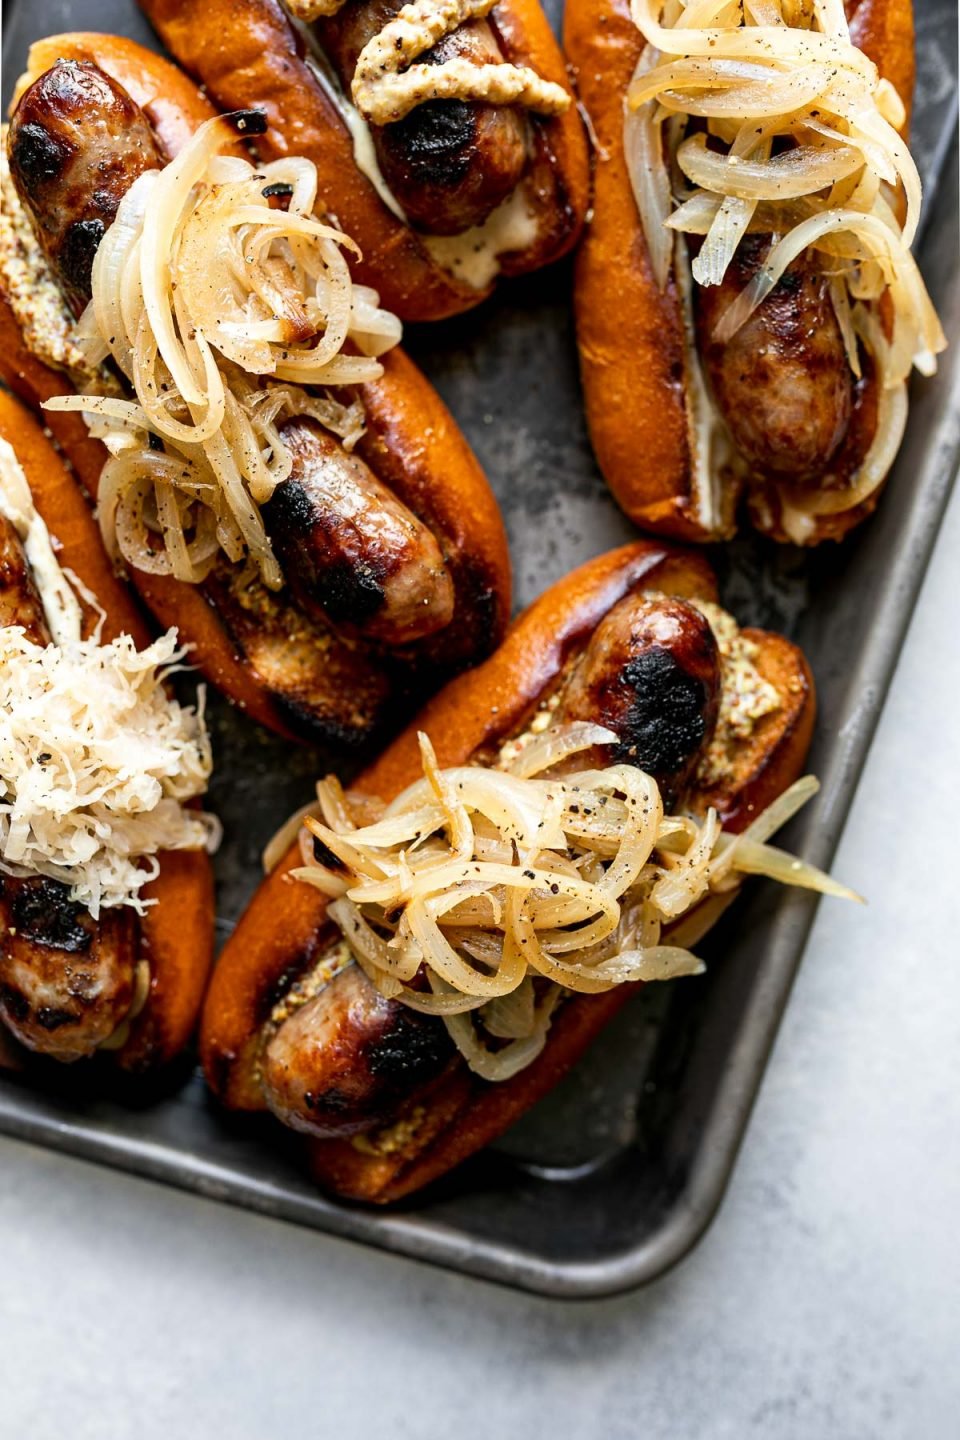 Grilled Wisconsin Beer Brats arranged on a small Nordicware baking sheet. The brats sit on toasted brioche buns, topped with mayonnaise, mustard, braised onions, sauerkraut, etc. The baking sheet sits atop a light blue surface.